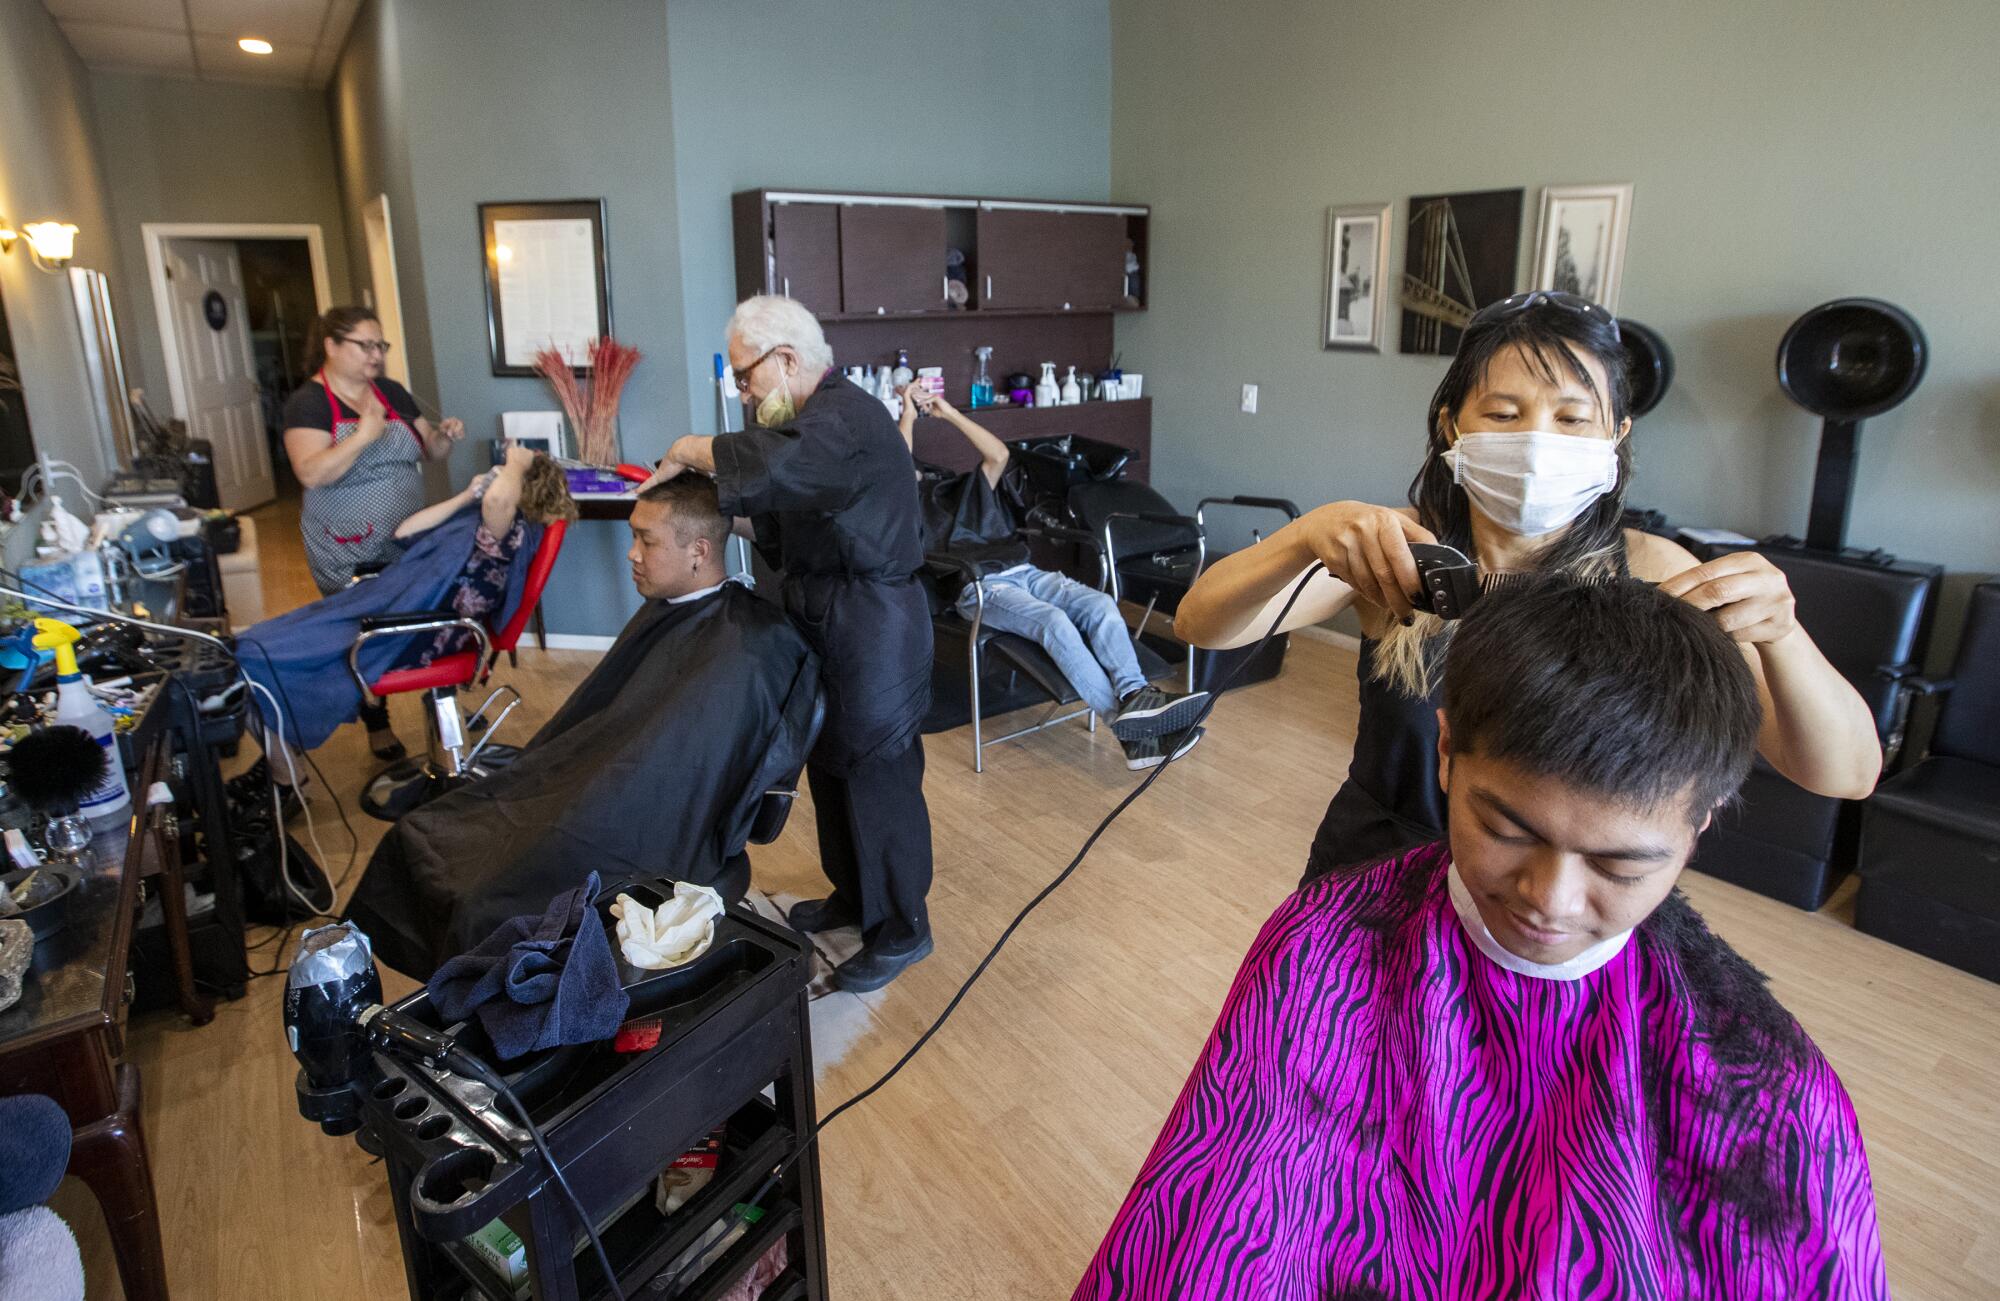 At Hair Event in Fullerton, stylists cut customers' hair.